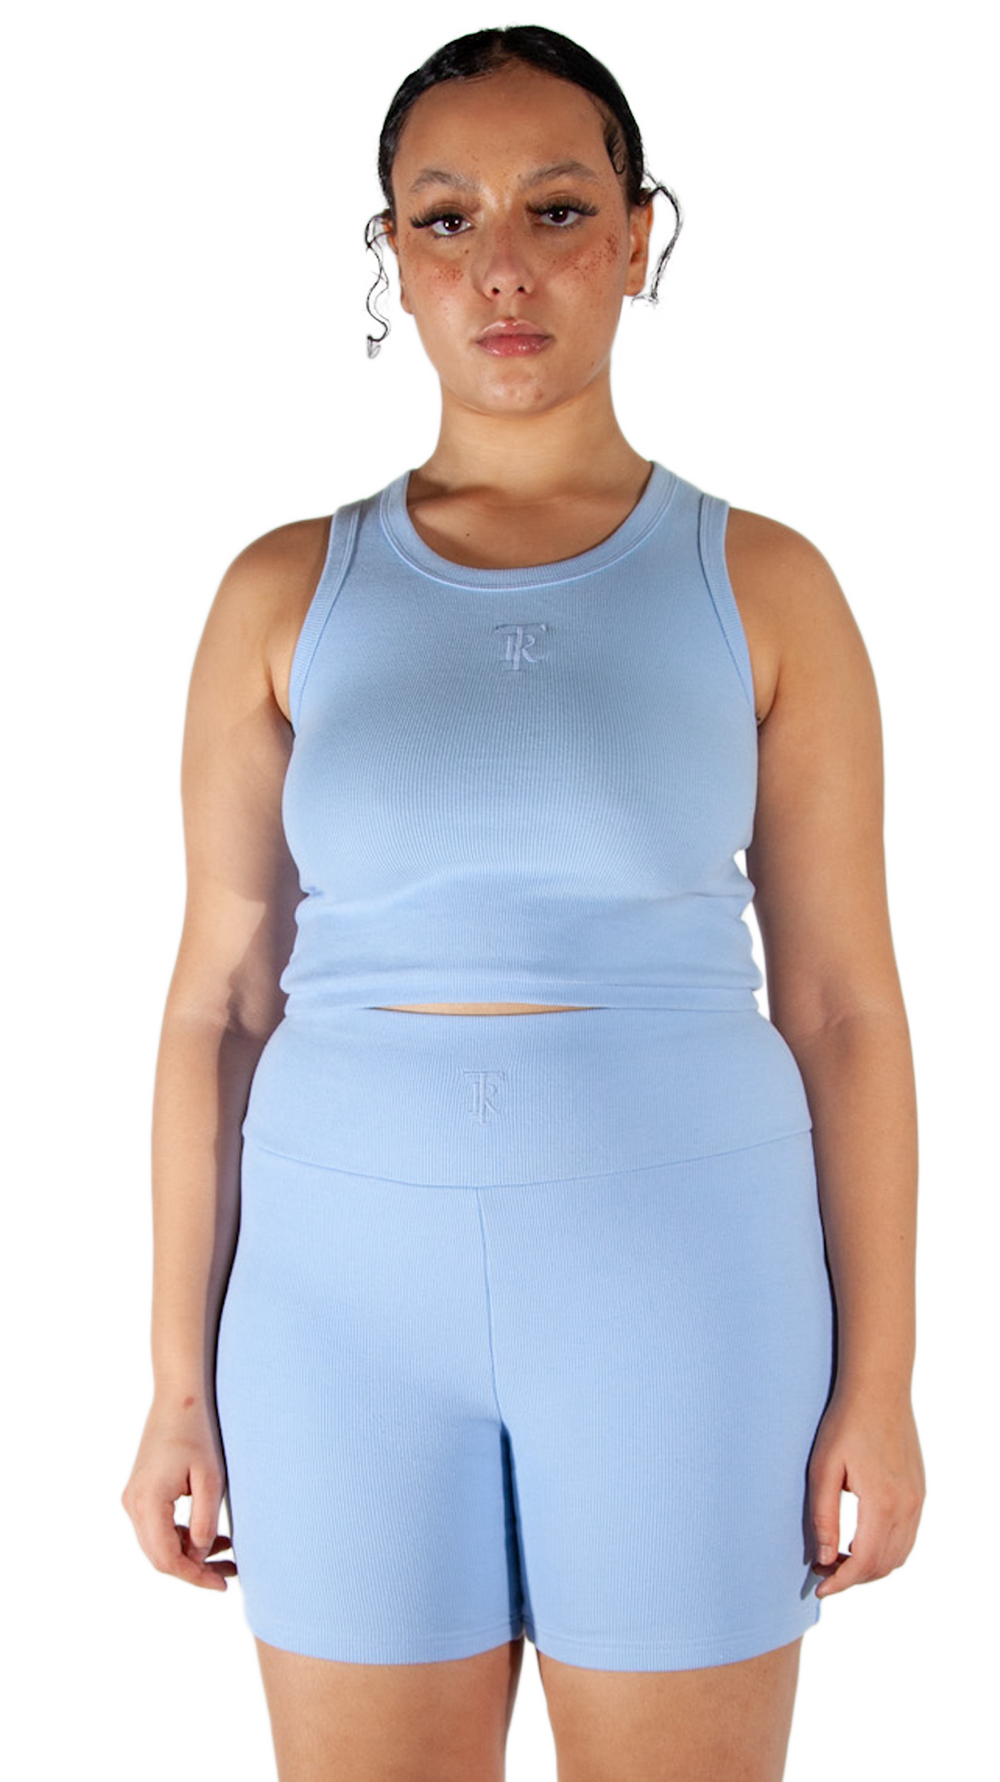 THE WIFE PROTECTOR CROP BABY BLUE